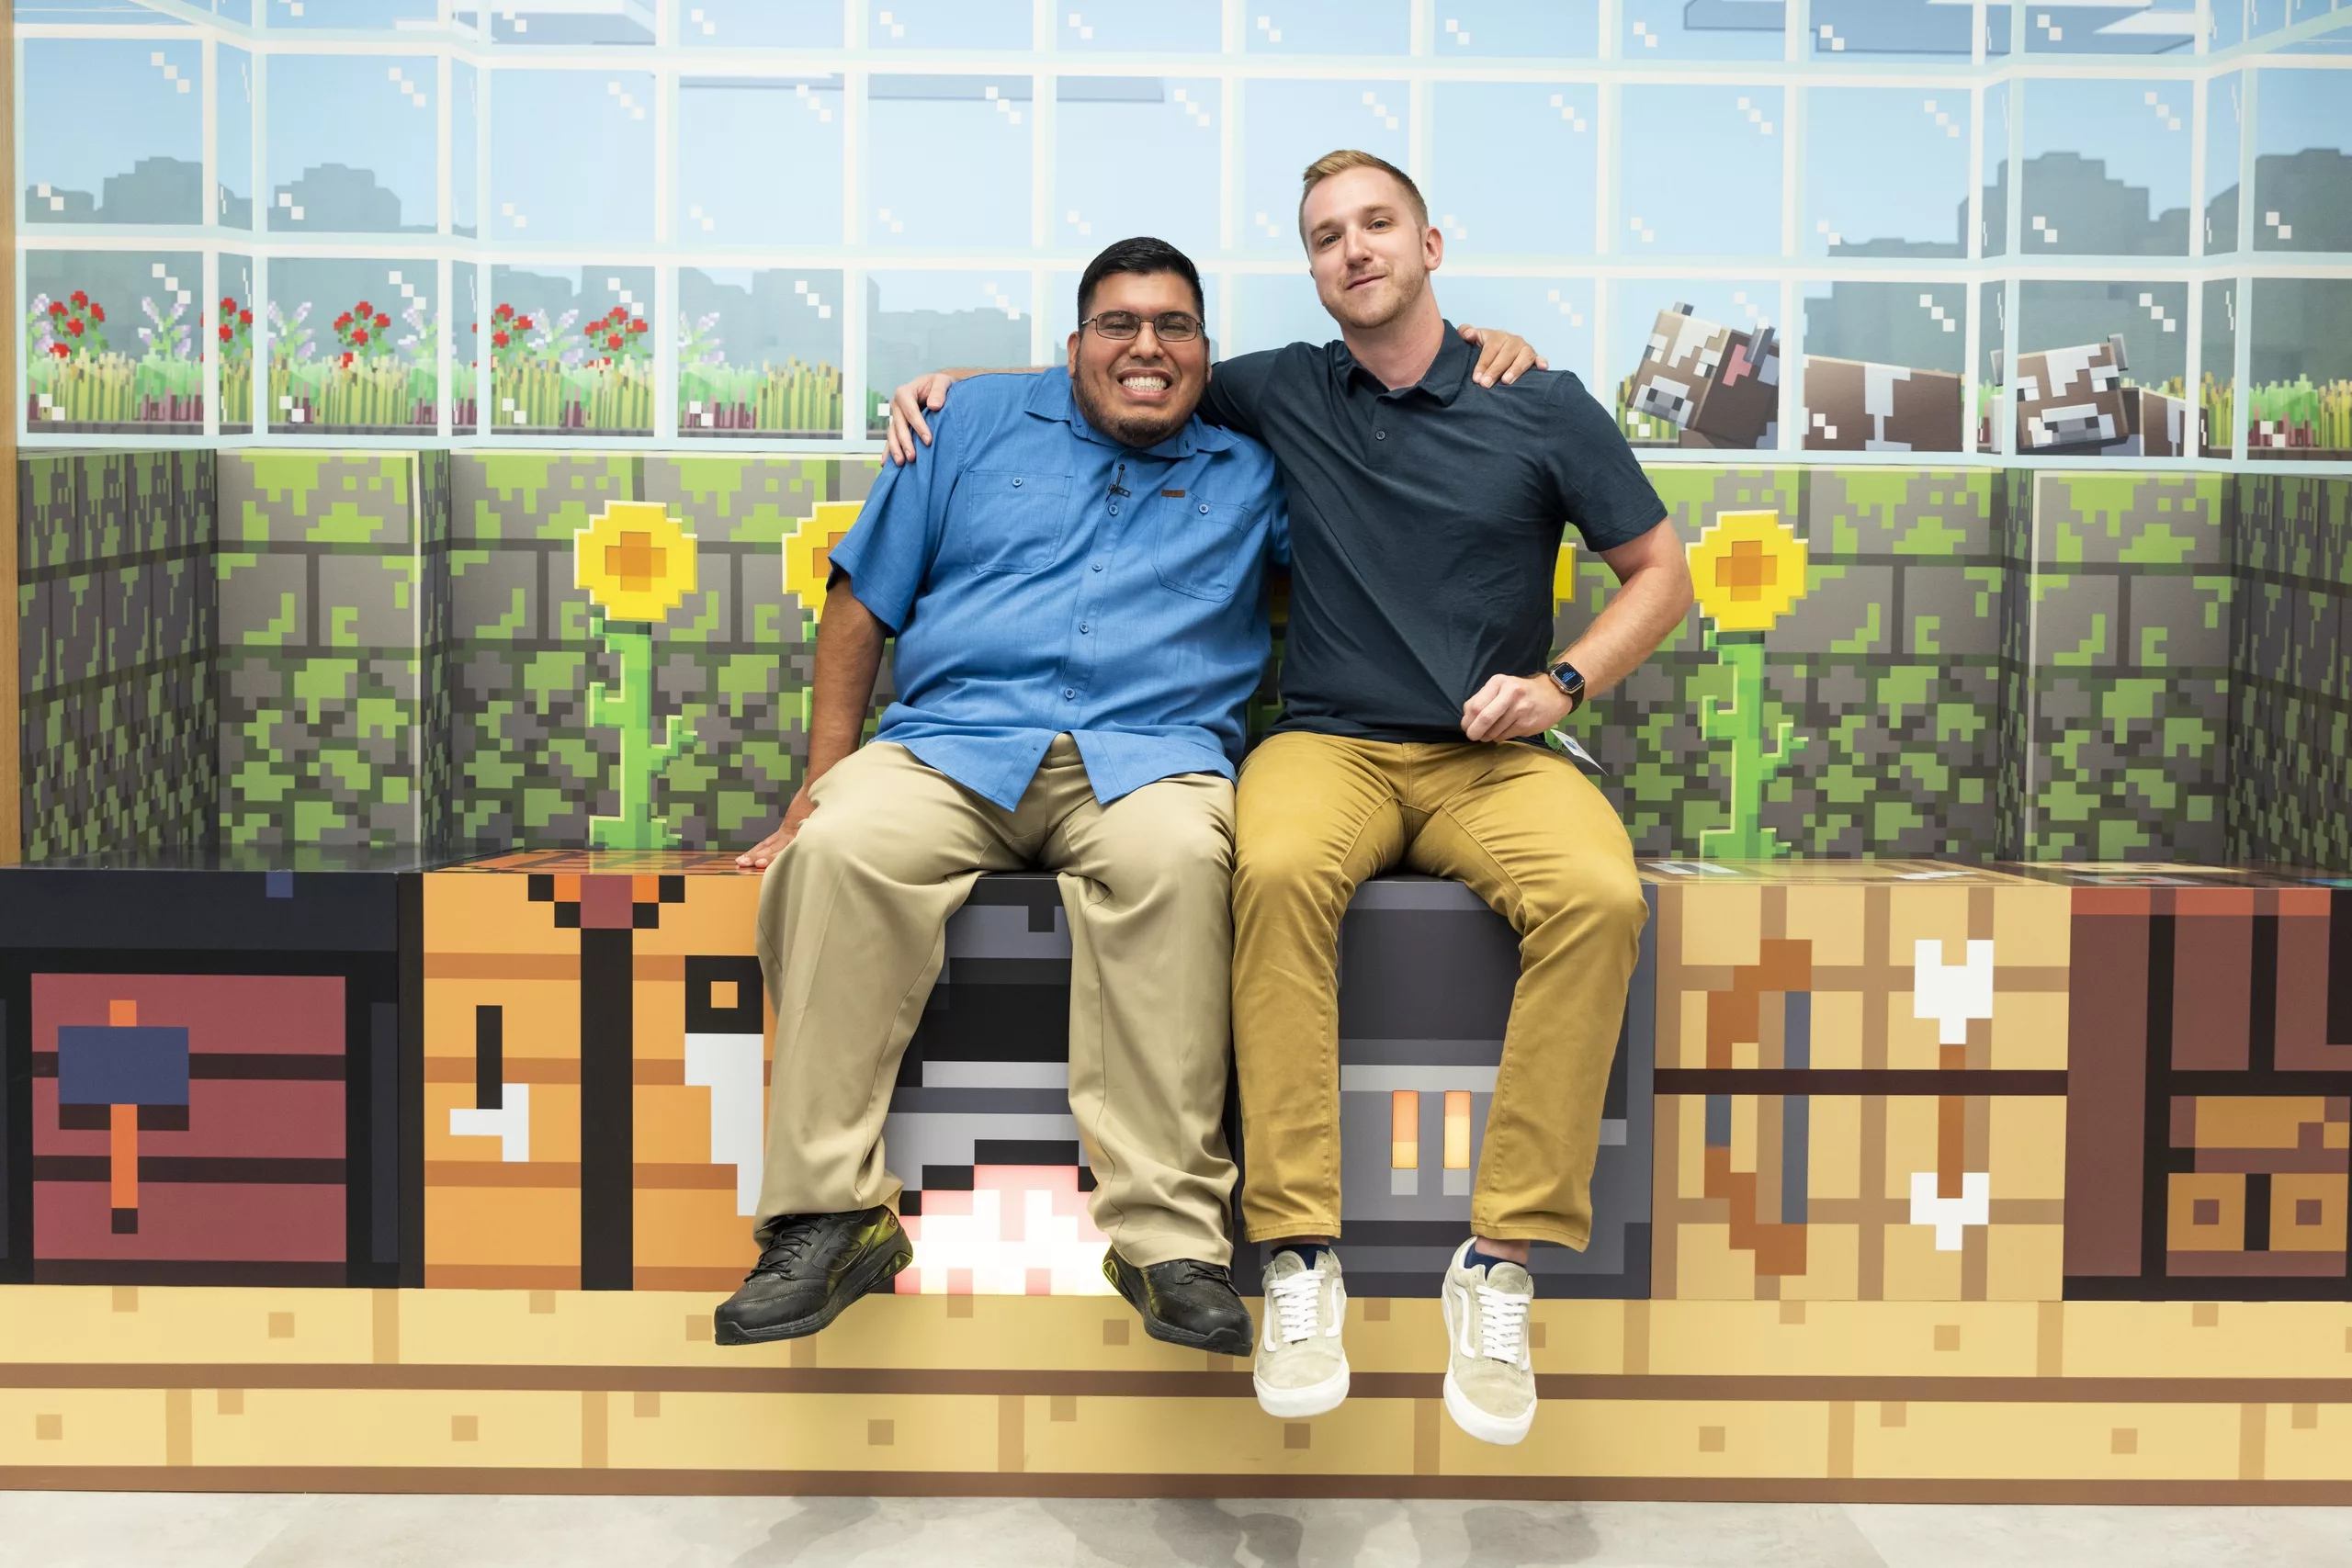 Two men sit smiling in a production set with walls made to look like the Minecraft “building-block” aesthetic.